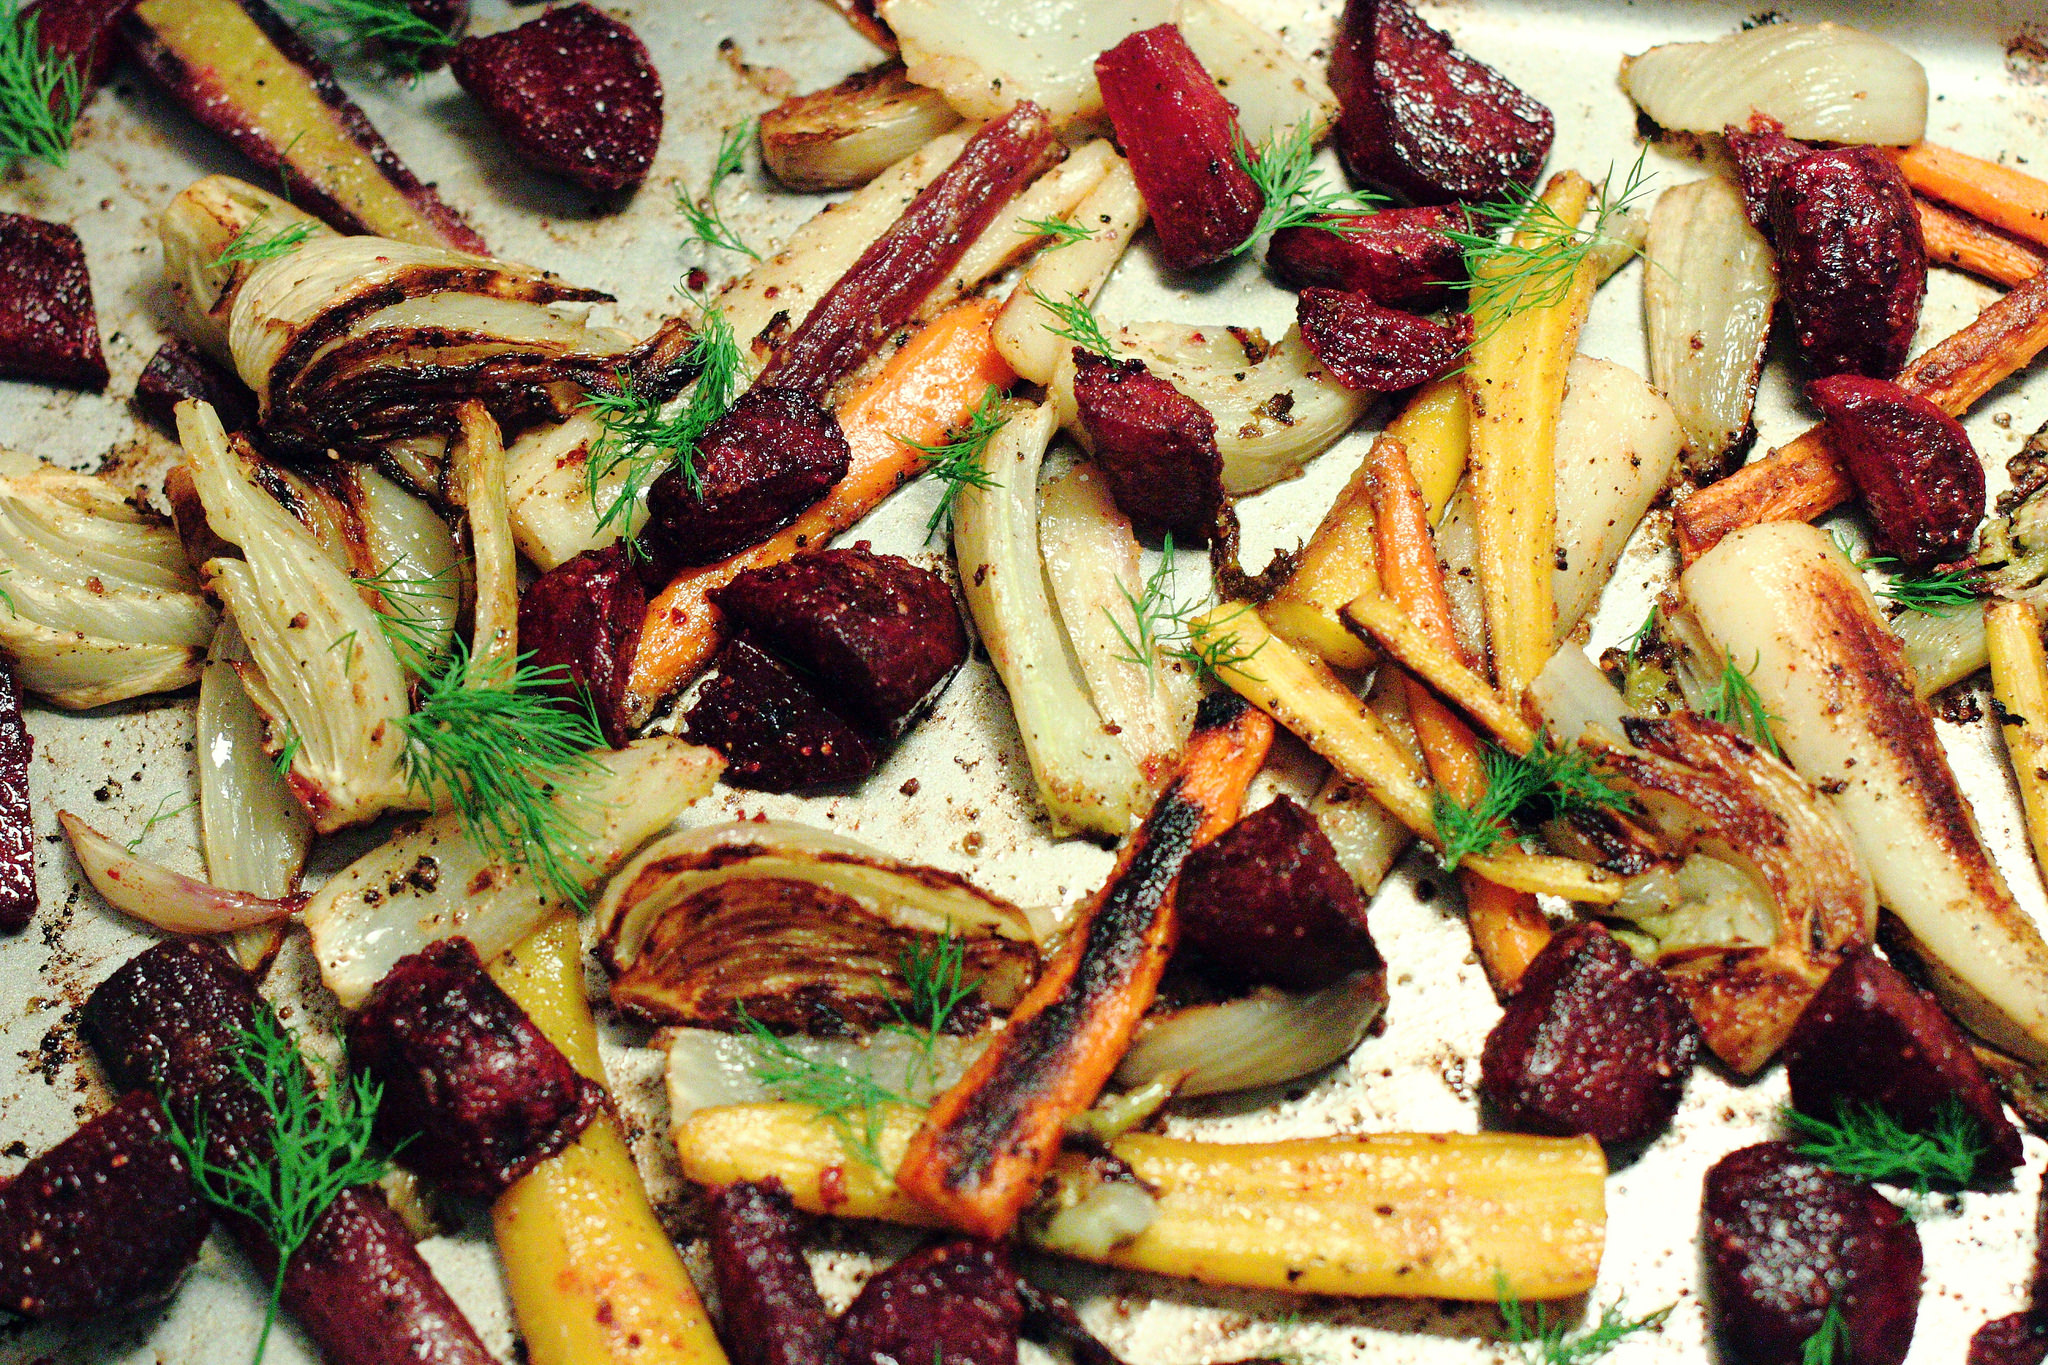 Caramelized Vegetables with Dijon Butter